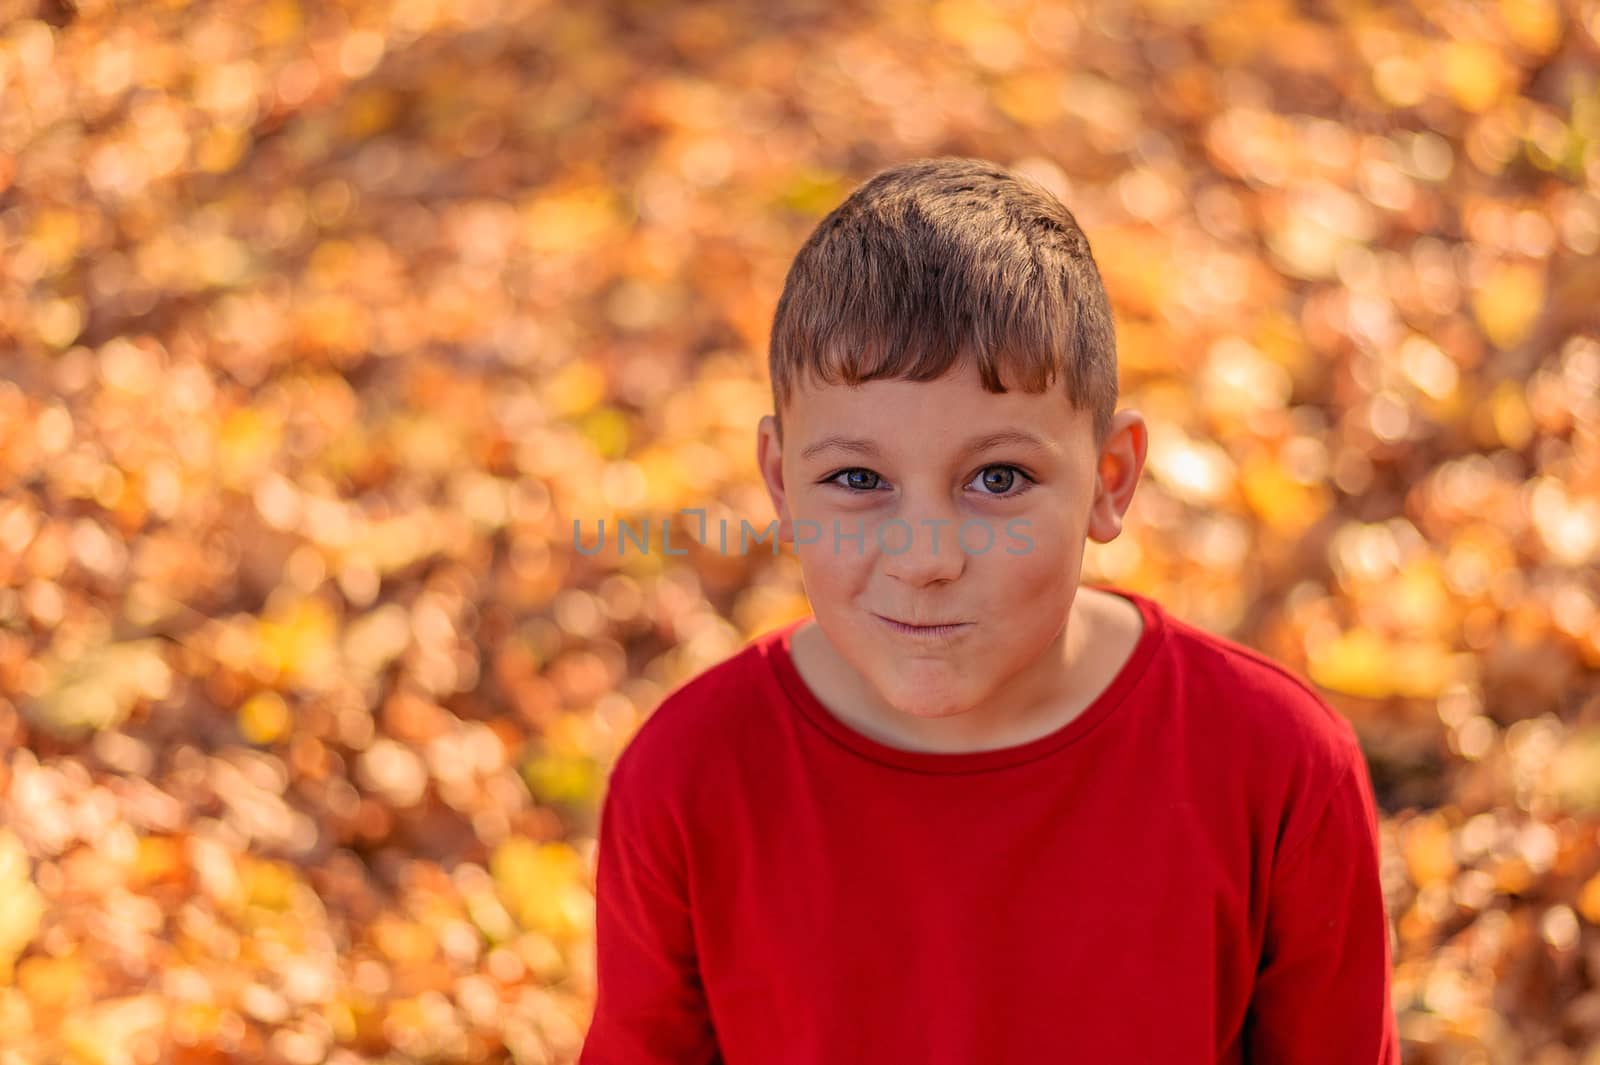 little boy in red with a beautiful smile stands in autumn park on fallen foliage by chernobrovin